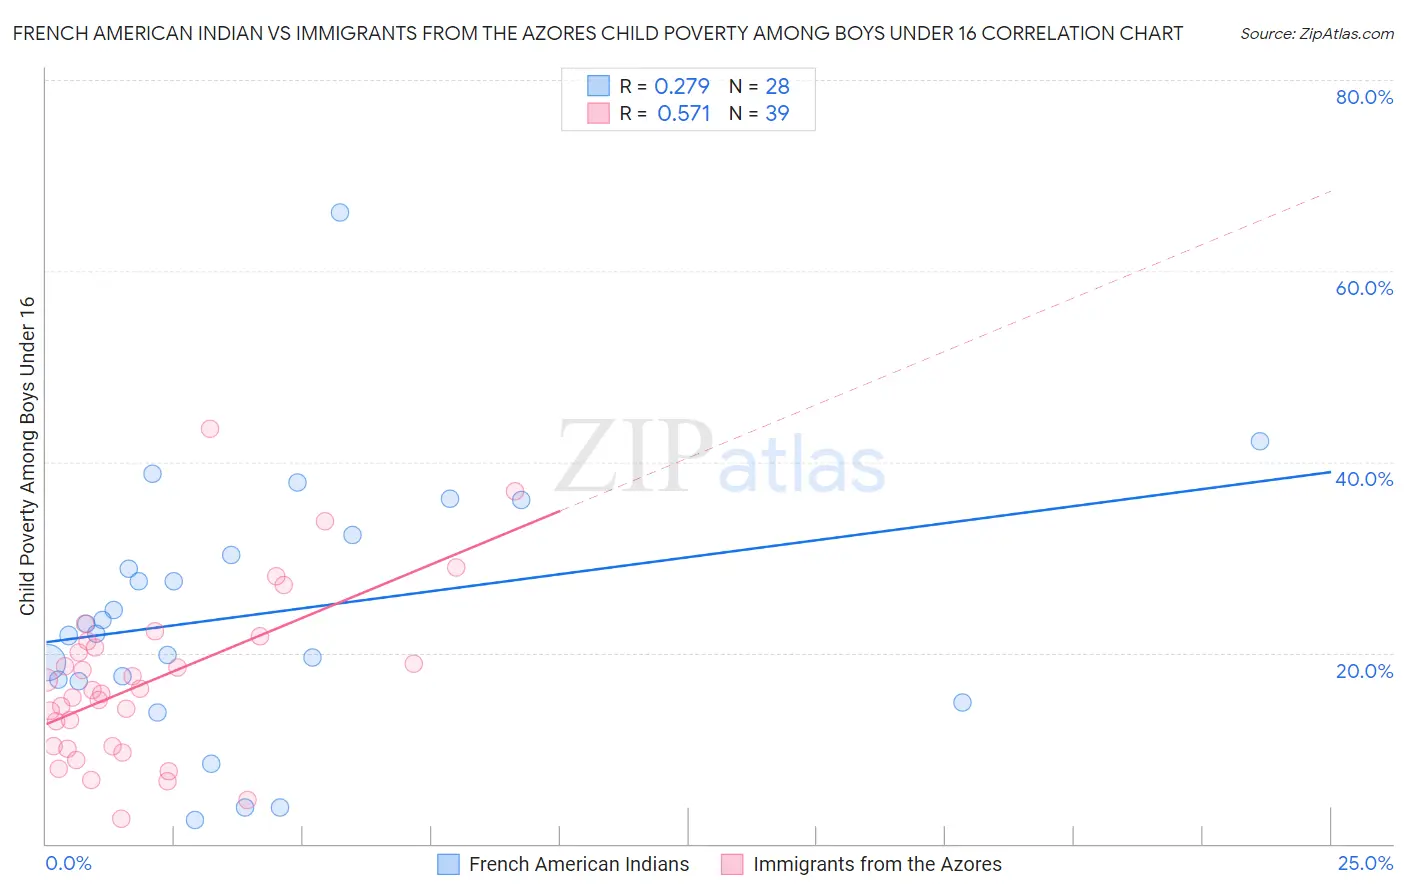 French American Indian vs Immigrants from the Azores Child Poverty Among Boys Under 16